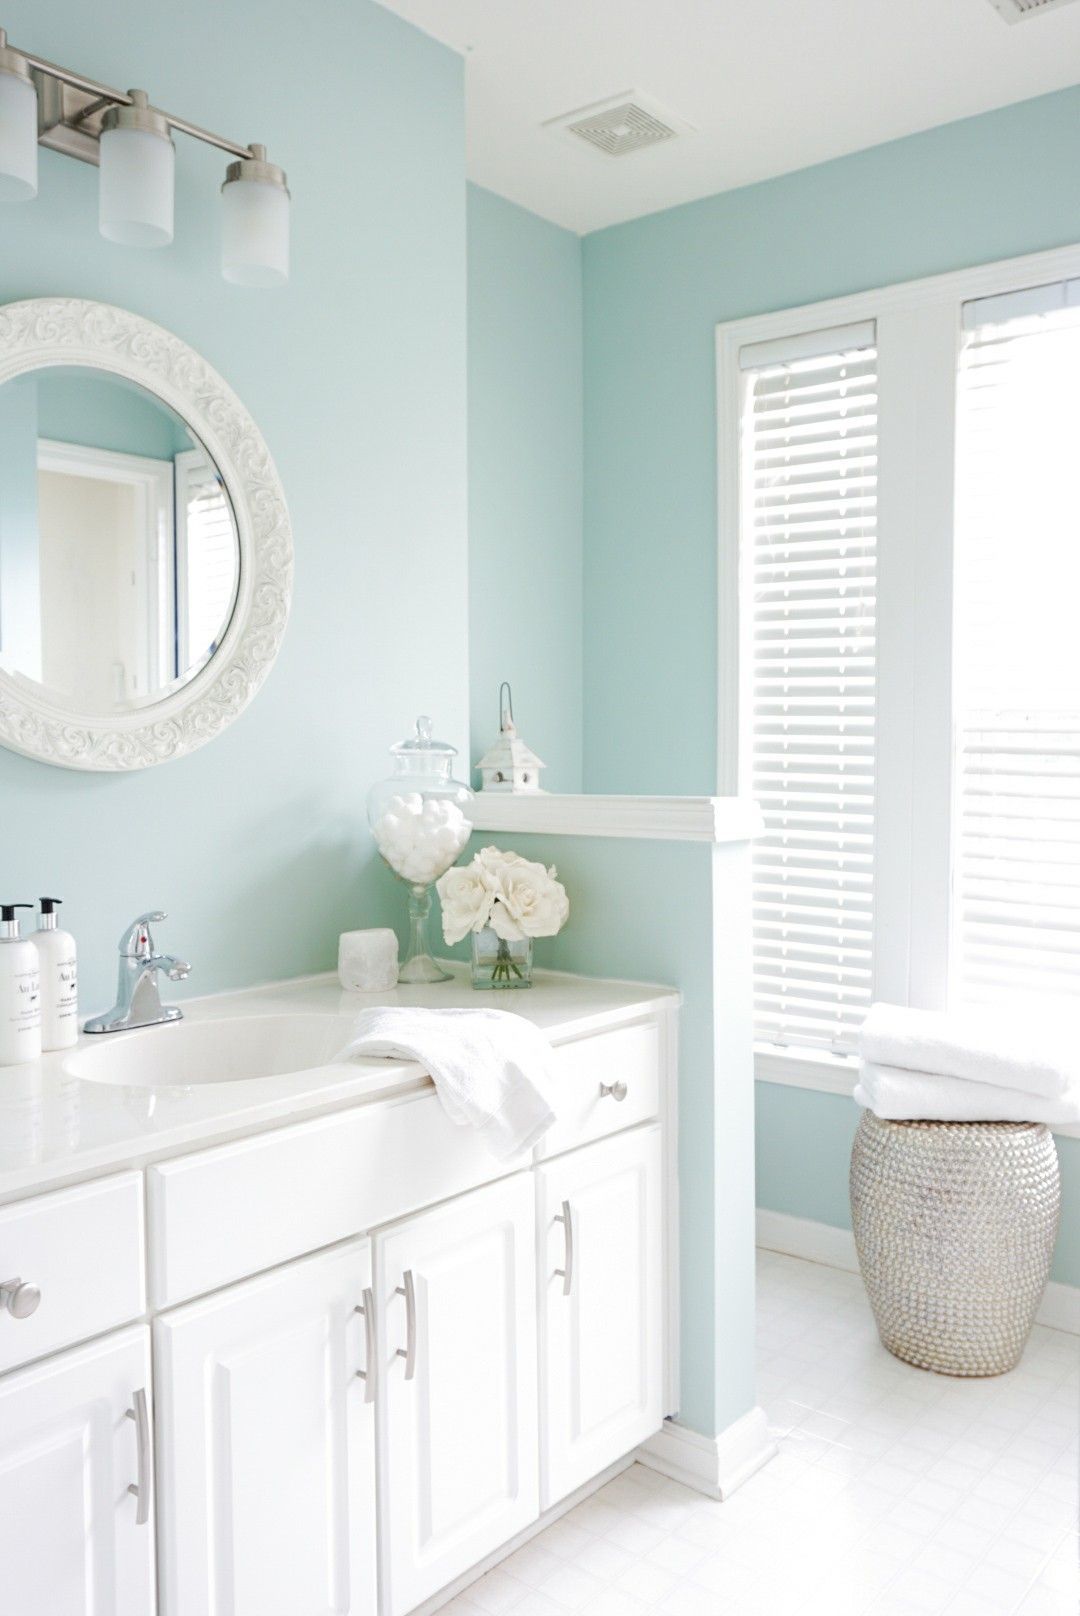 √ Bathroom Color Ideas – BEST Paint and Color Schemes for Bathroom